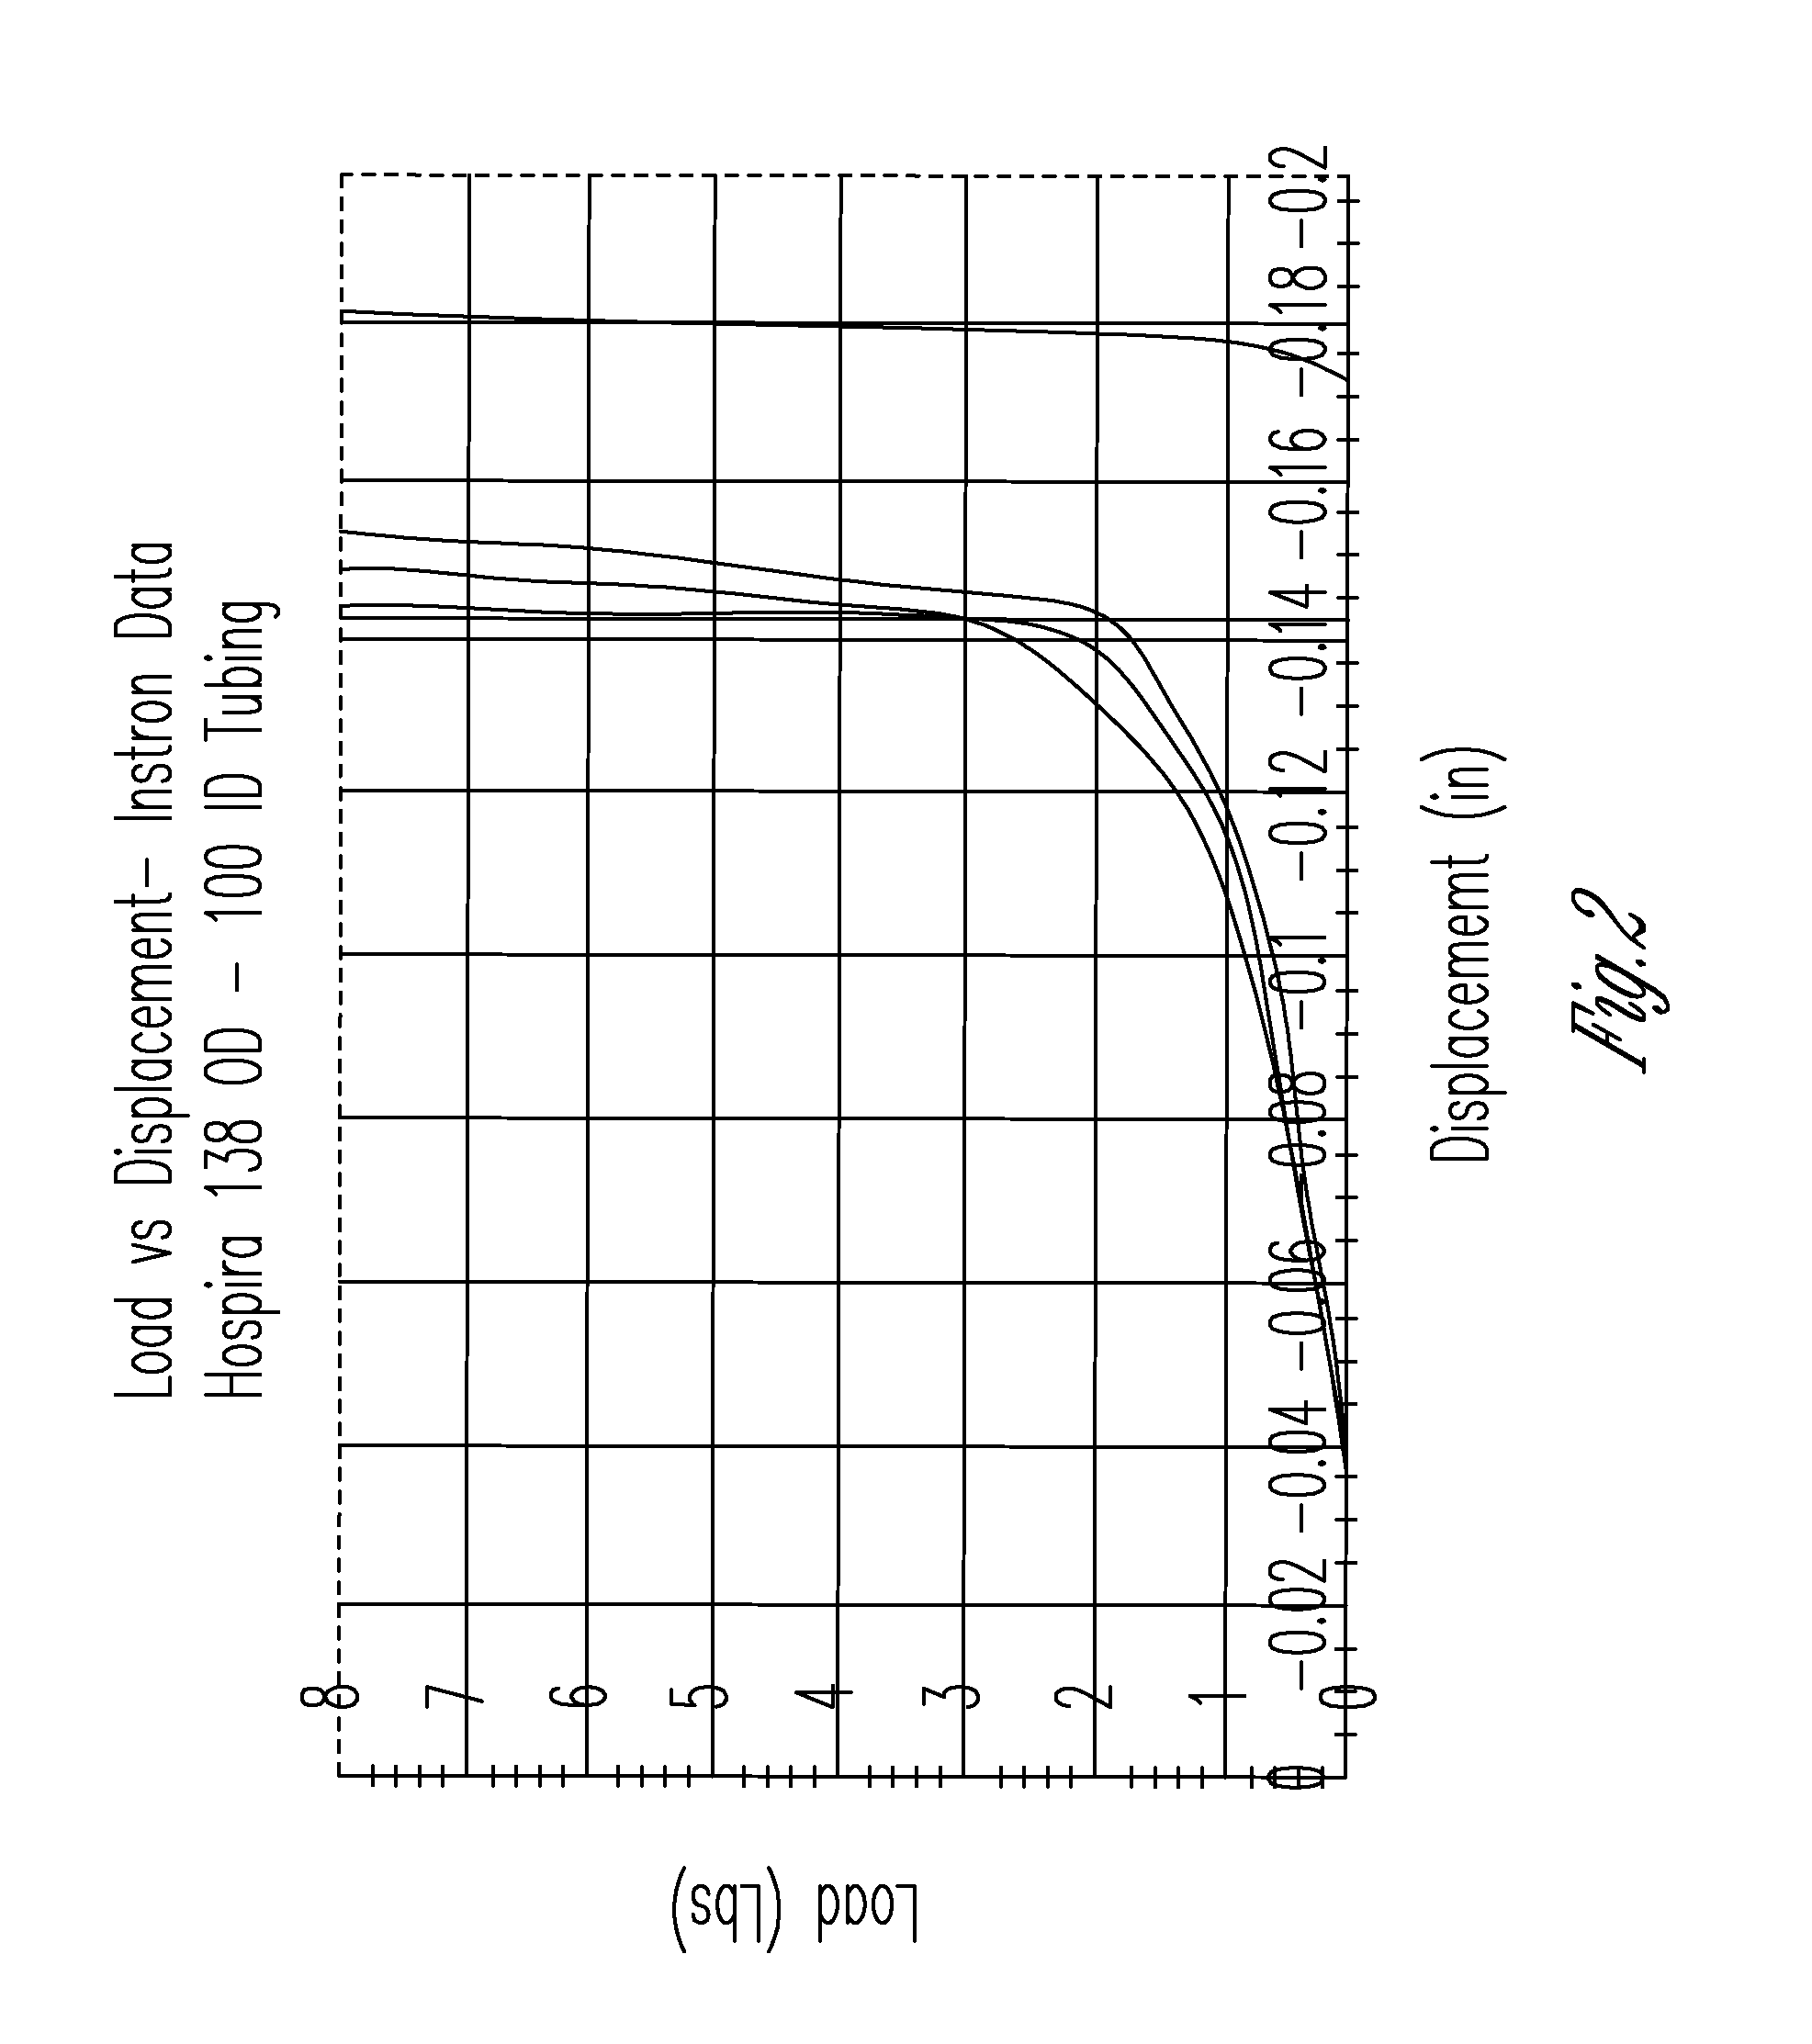 Fluid flow rate compensation system using an integrated conductivity sensor to monitor tubing changes